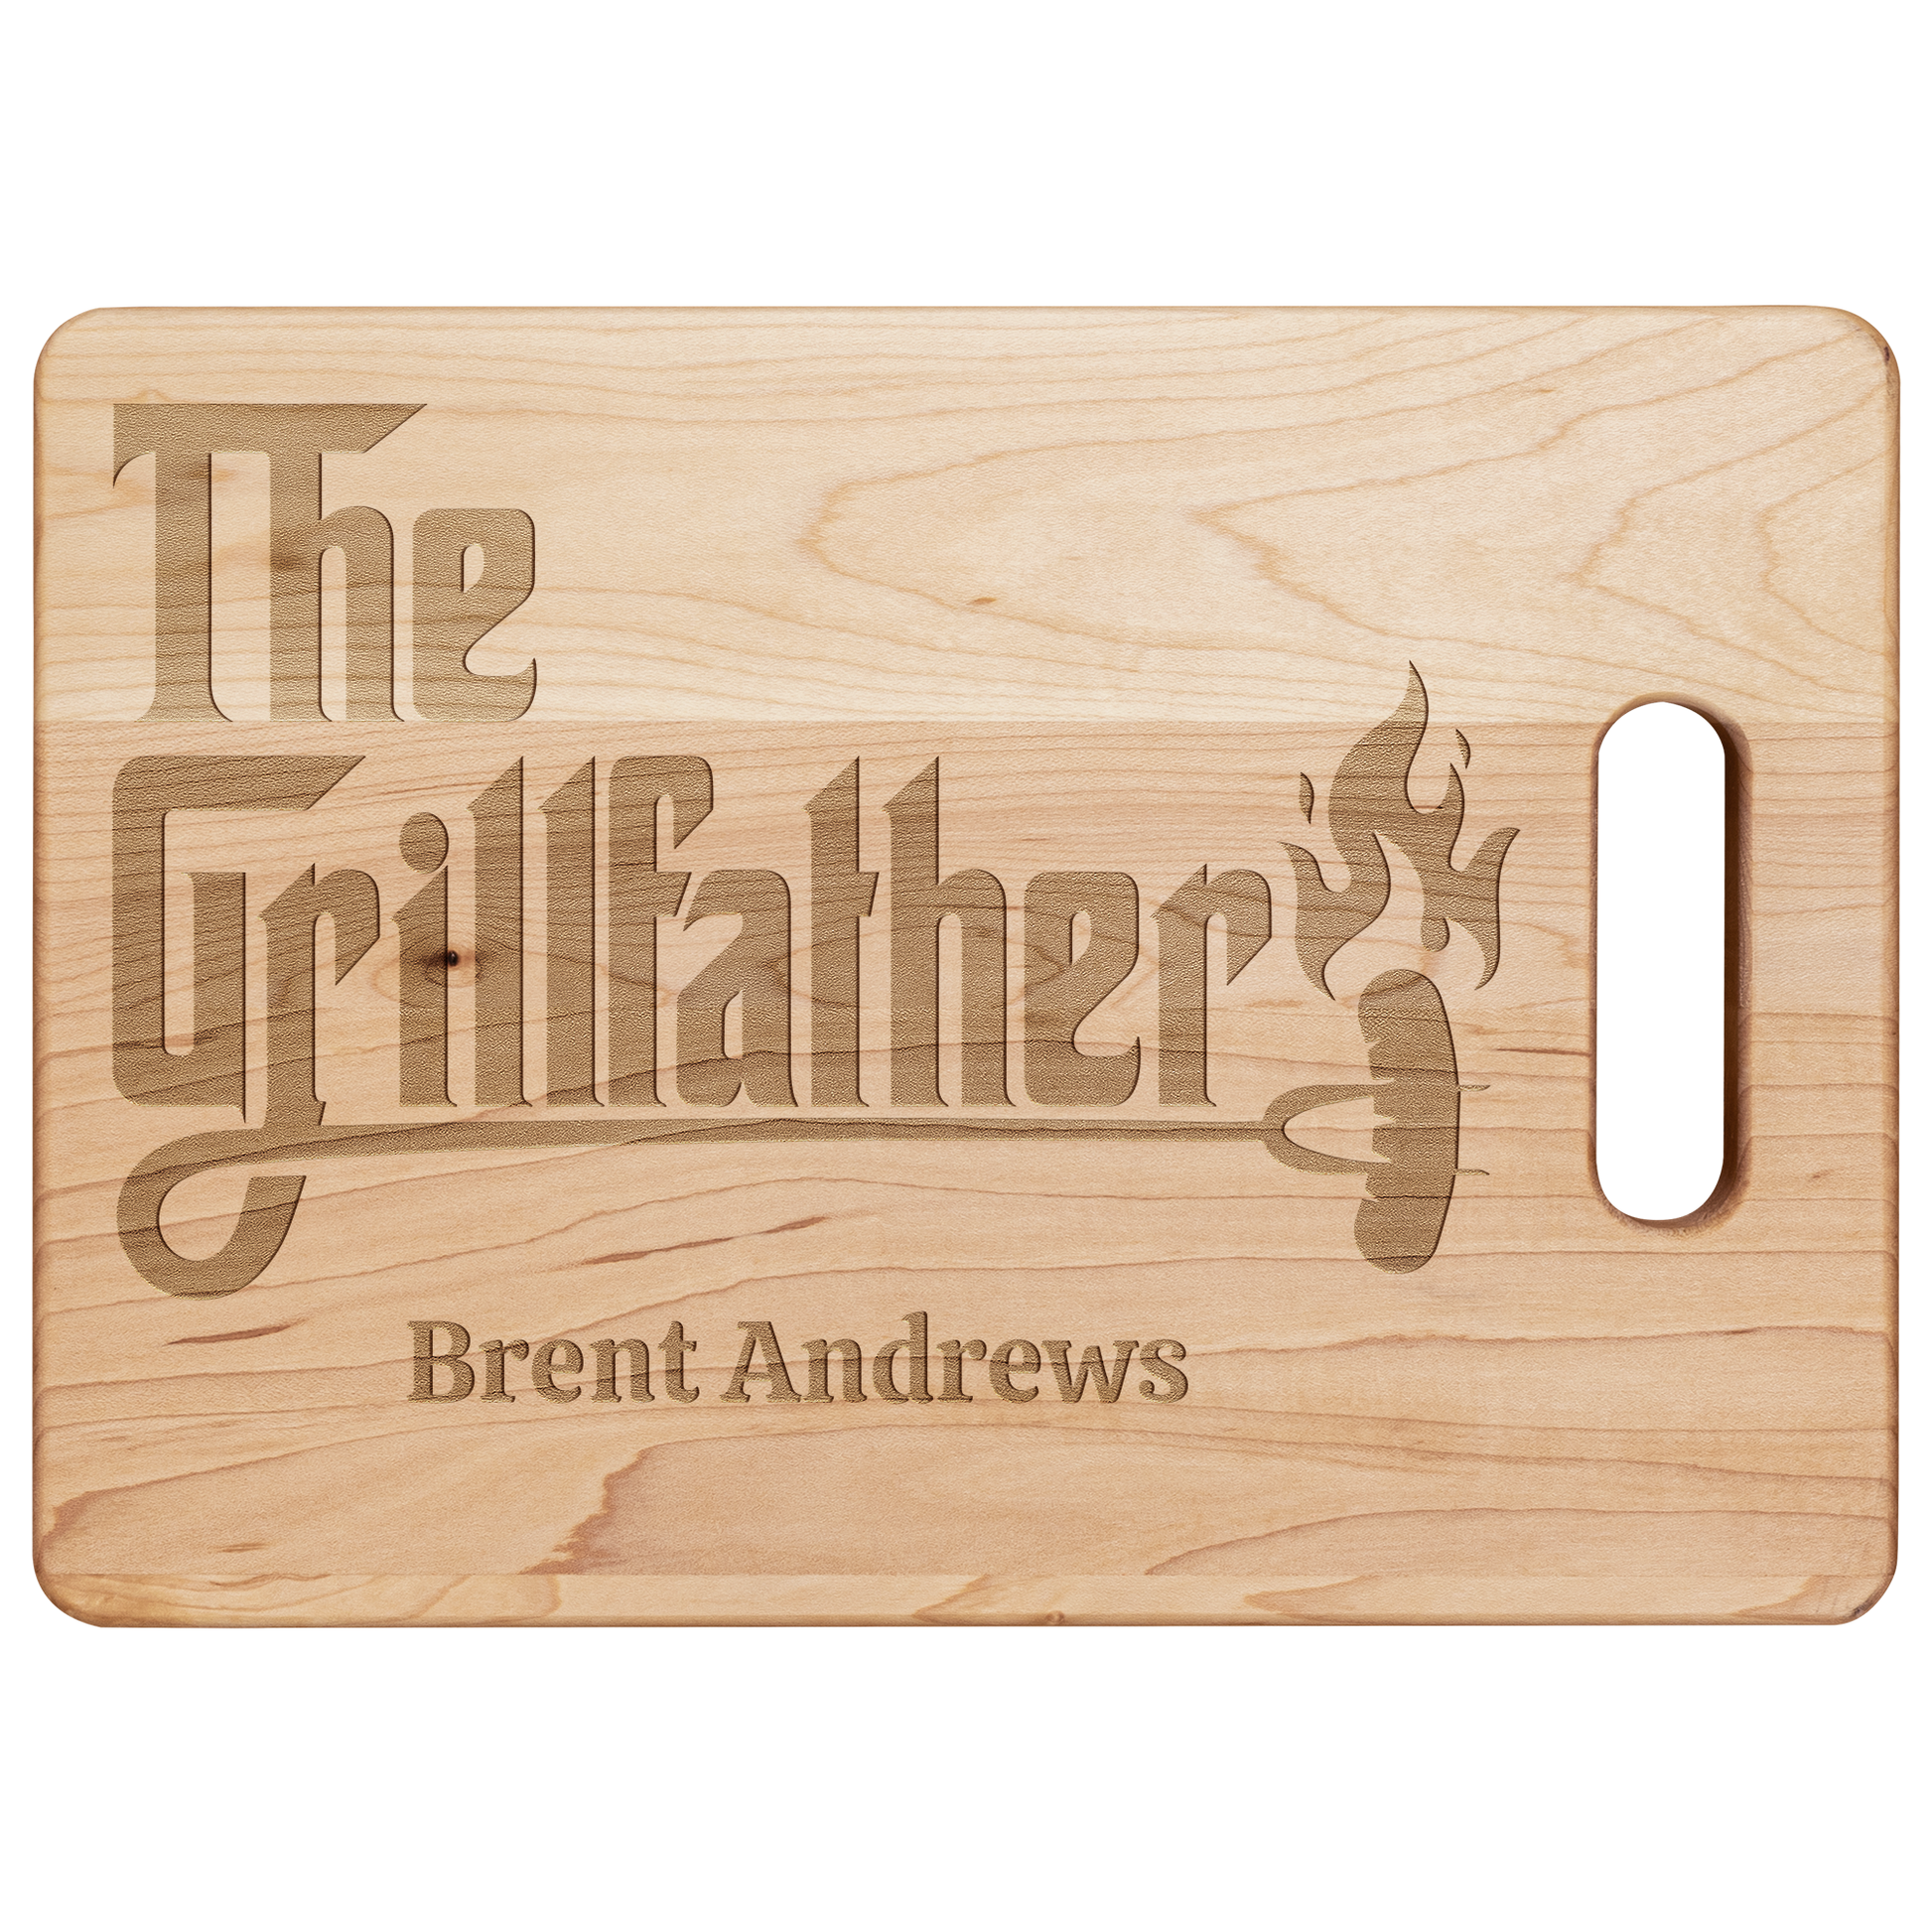 Get trendy with "The GrillFather " Maple Cutting Board -  available at Good Gift Company. Grab yours for $25 today!